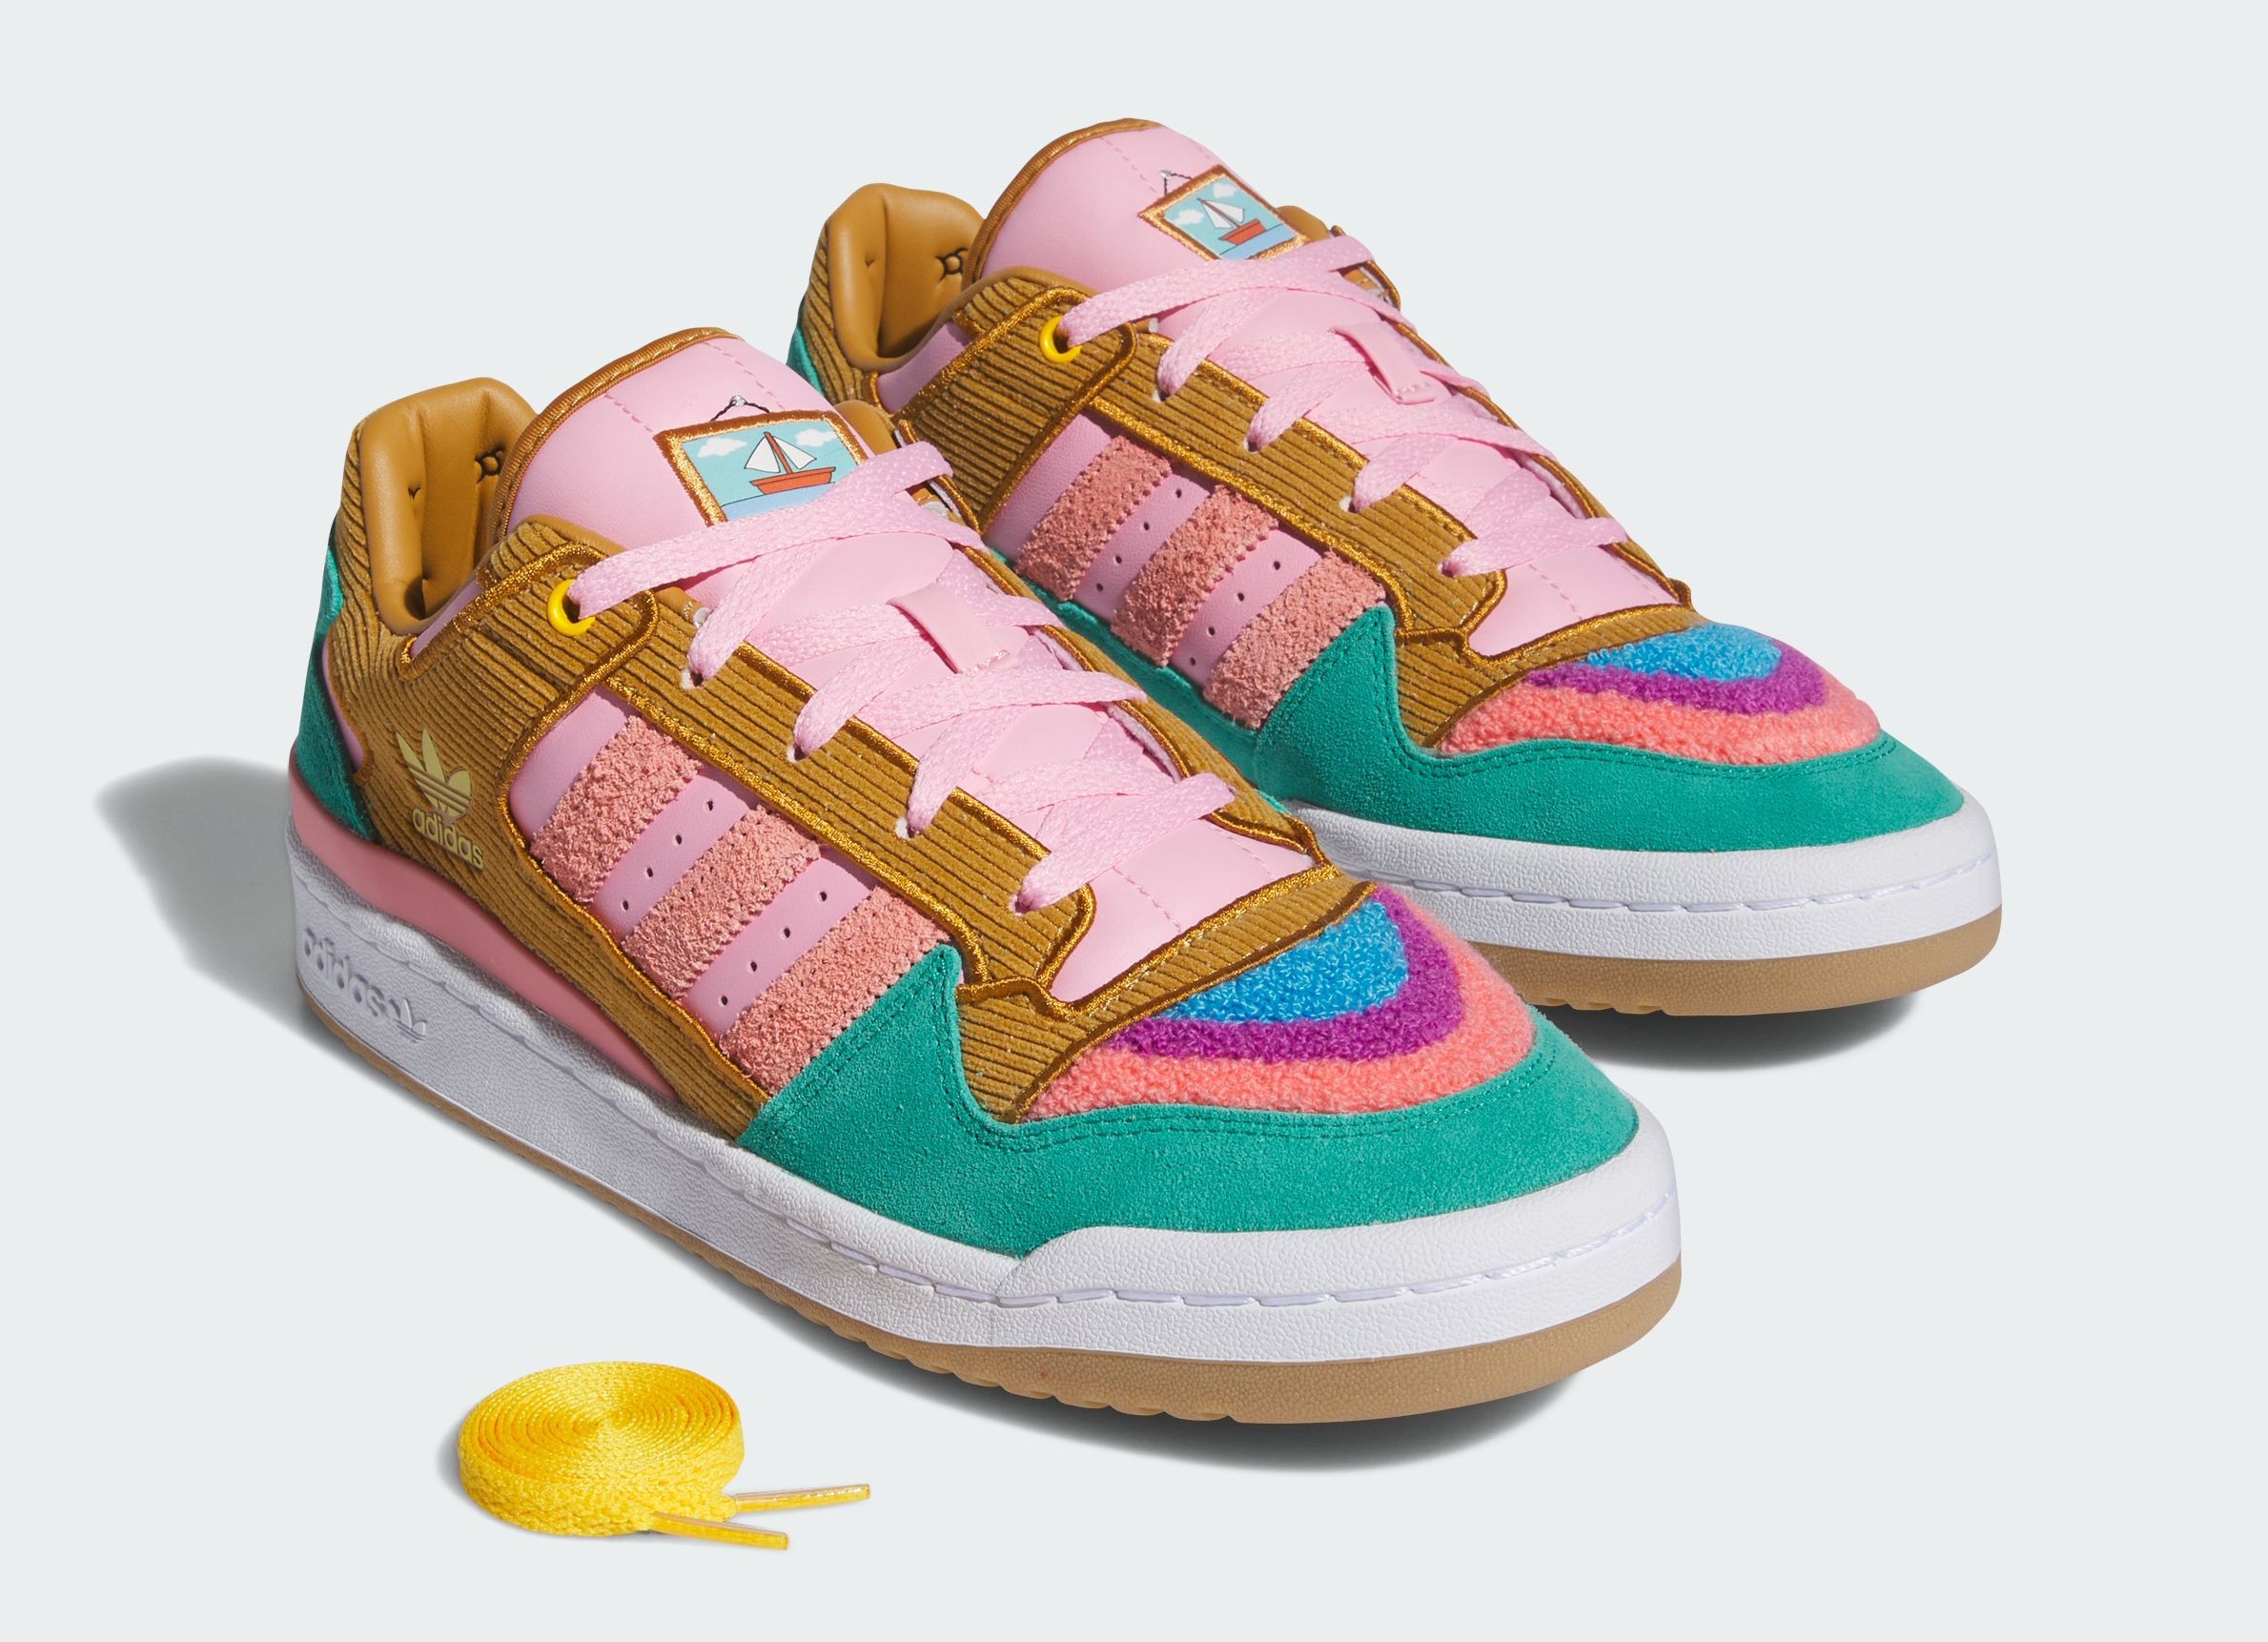 House Adidas Soon Simpsons Room” Forum of Coming x The Heat° “Living is Low |